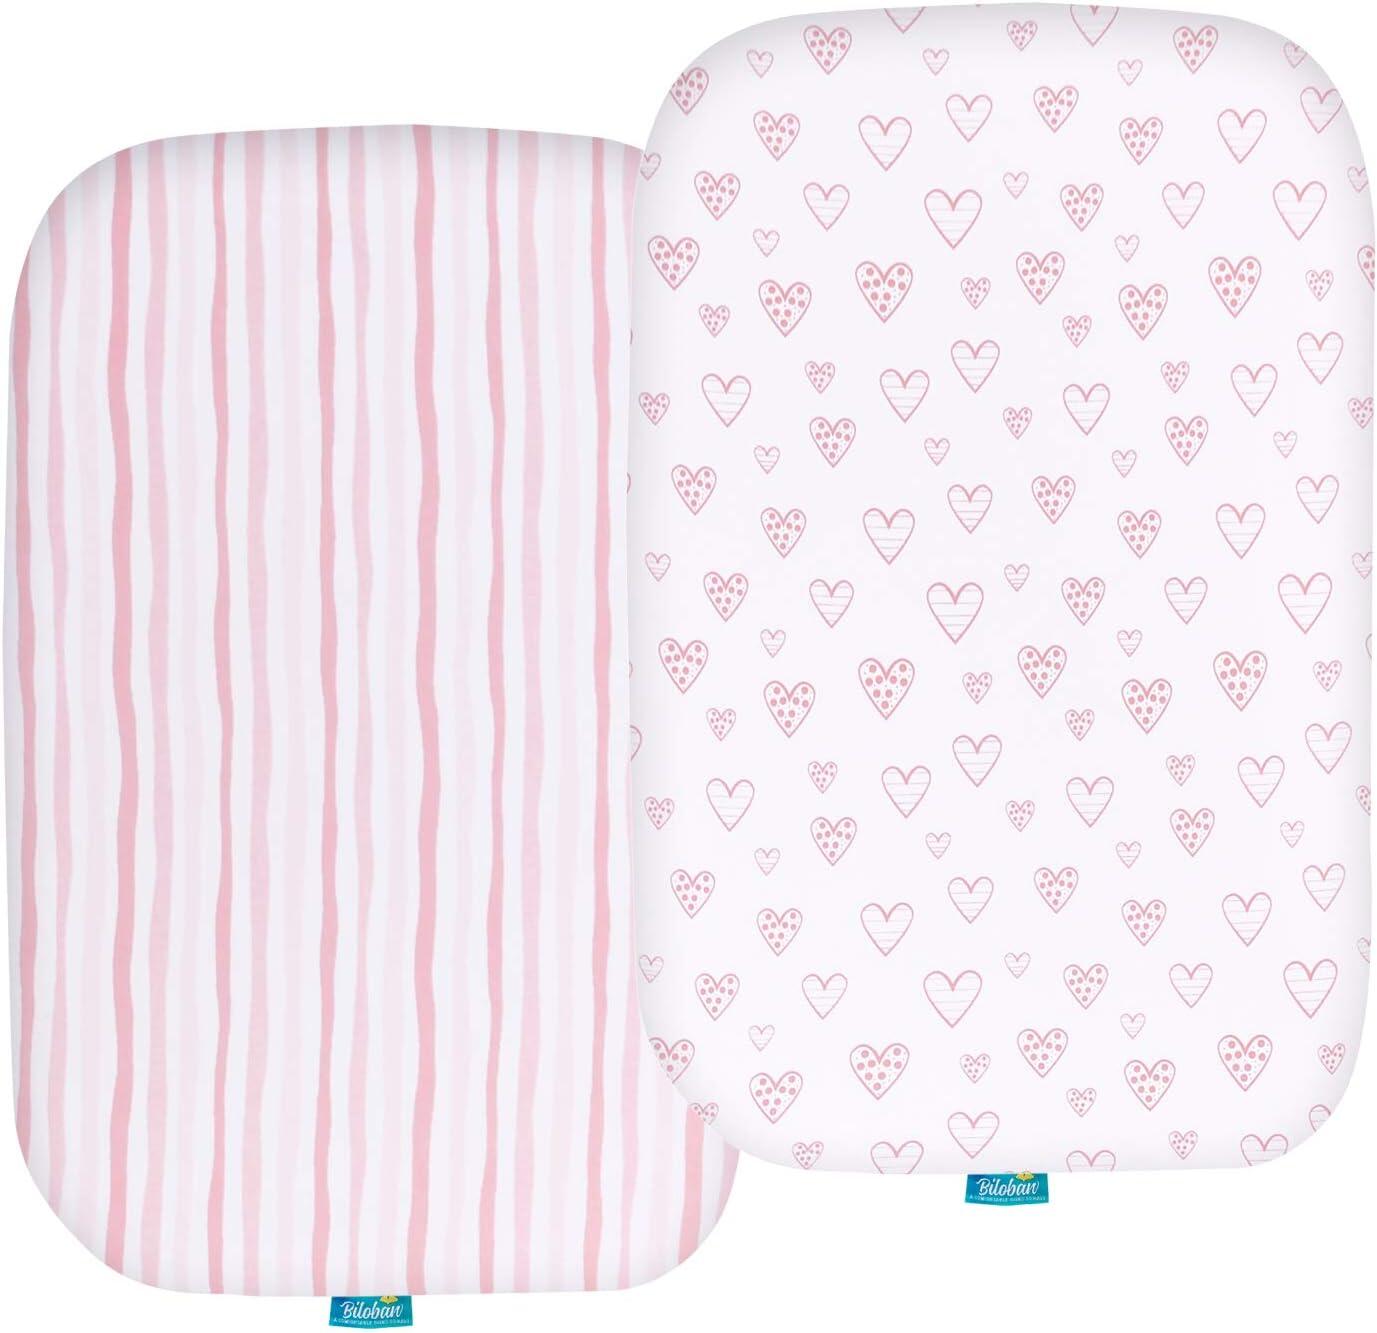 Bassinet Sheets - Fit Graco My View 4 in 1 Bassinet, 2 Pack, 100% Jersey Cotton, Pink & White - Biloban Online Store